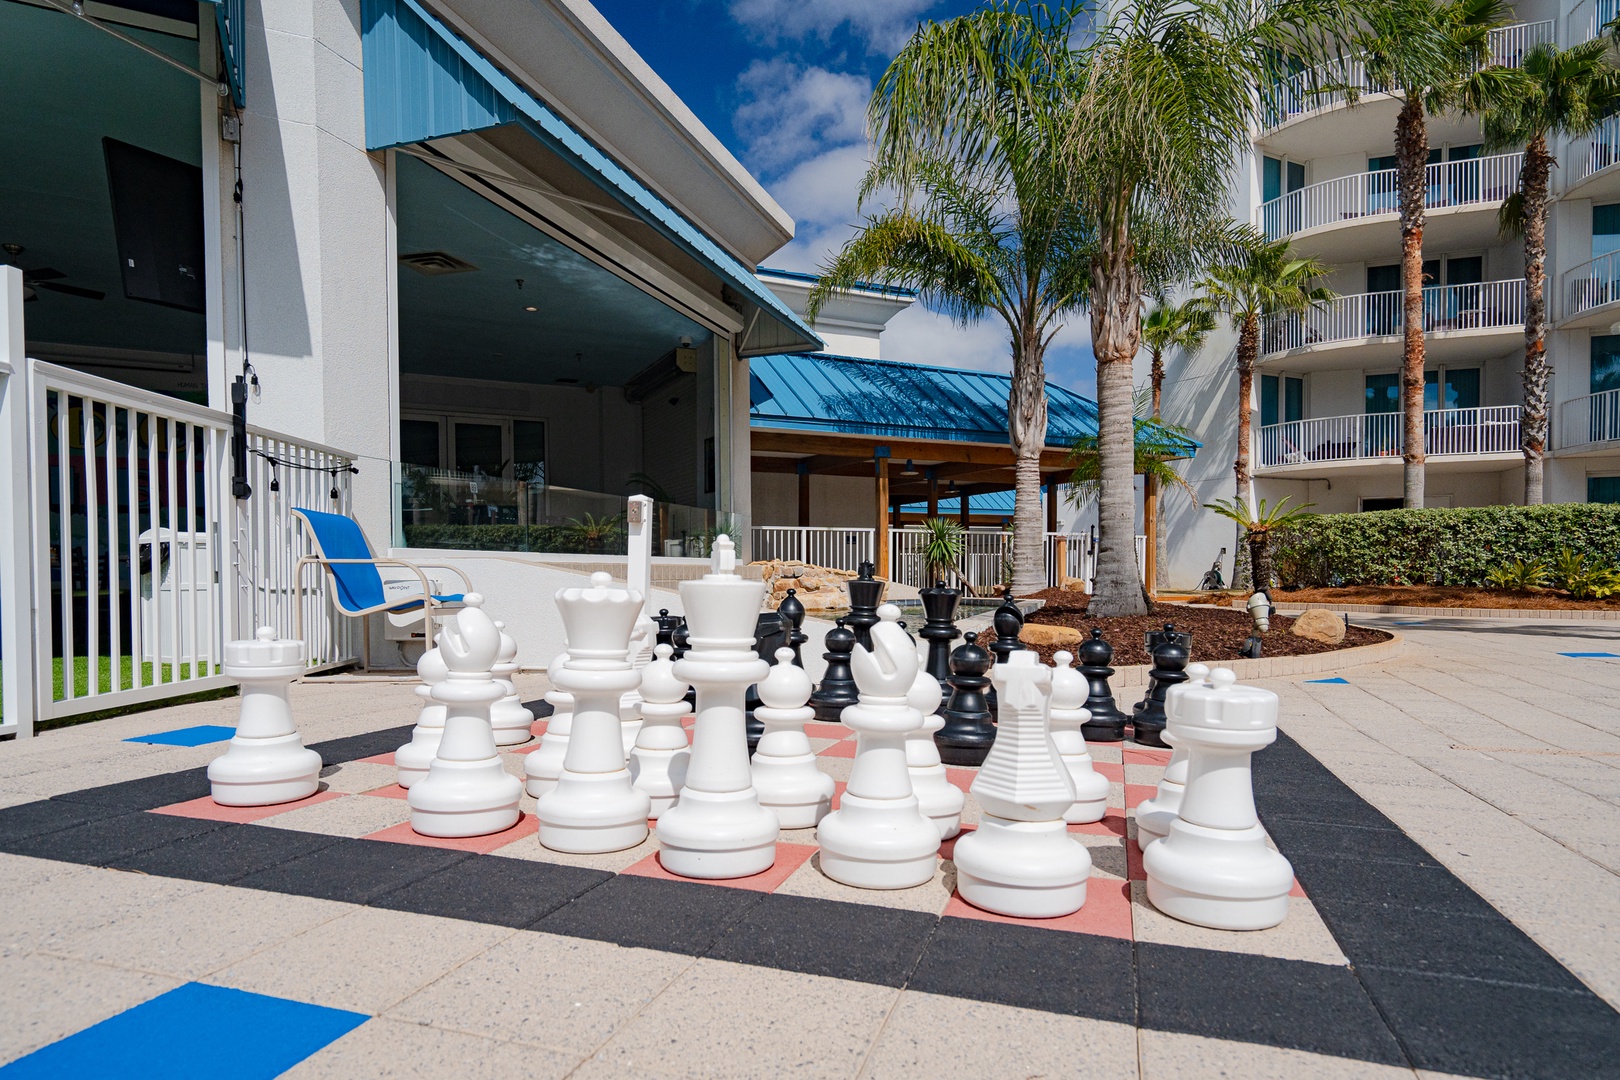 Enjoy an afternoon game of chess while soaking up the sun